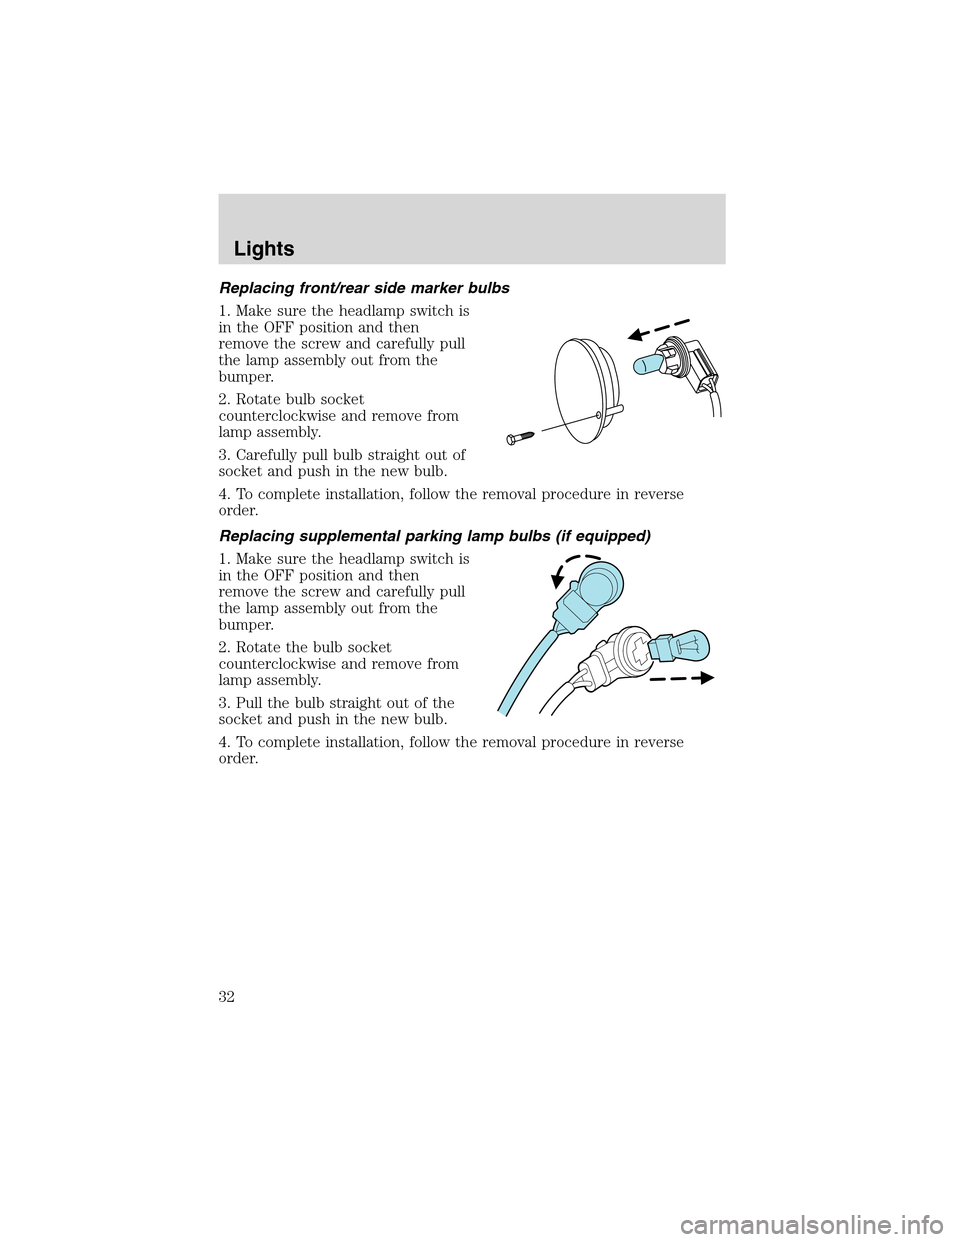 FORD THUNDERBIRD 2003 11.G Owners Manual Replacing front/rear side marker bulbs
1. Make sure the headlamp switch is
in the OFF position and then
remove the screw and carefully pull
the lamp assembly out from the
bumper.
2. Rotate bulb socket